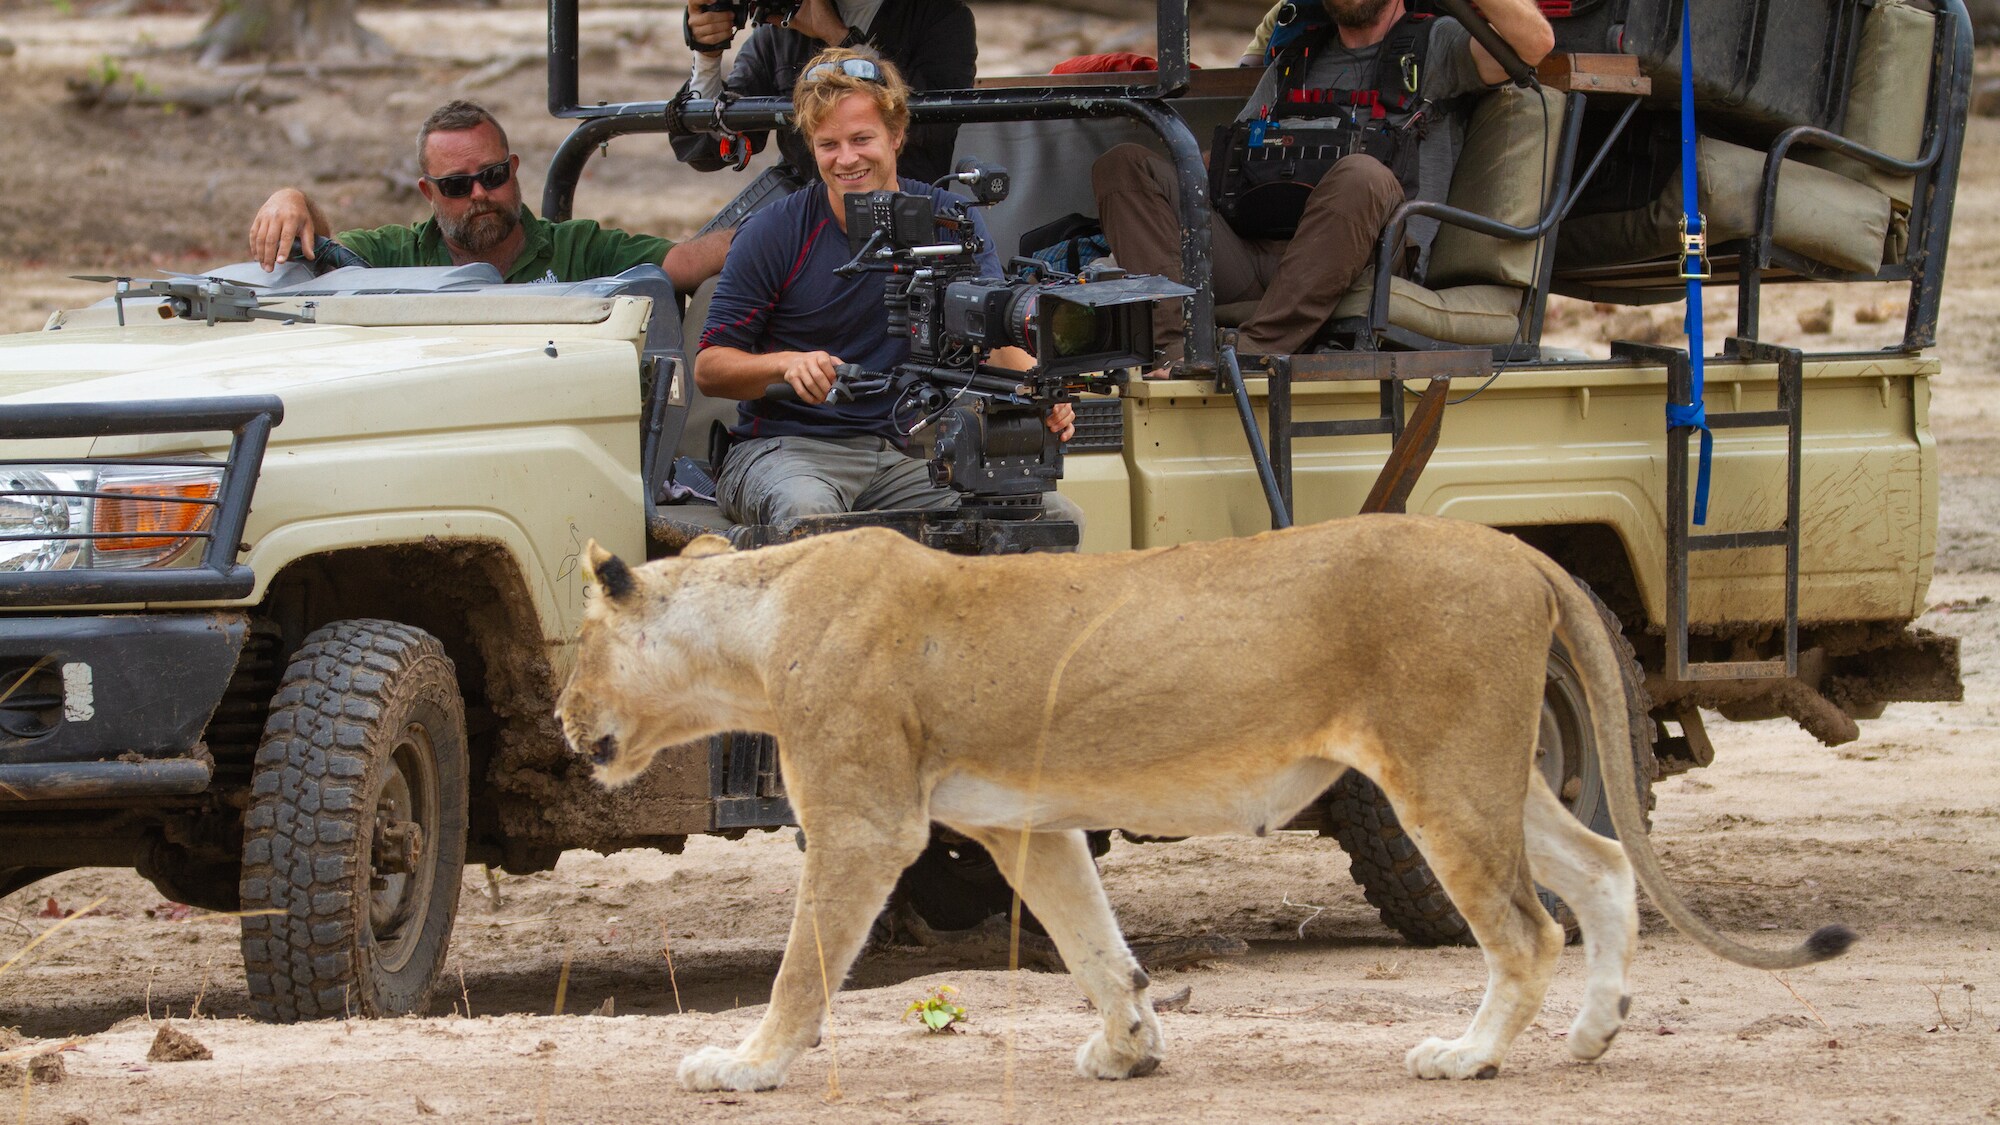 A lion from the Mwamba pride walks closely past Bertie's filming vehicle. (Credit: National Geographic for Disney+/Samson Moyo)